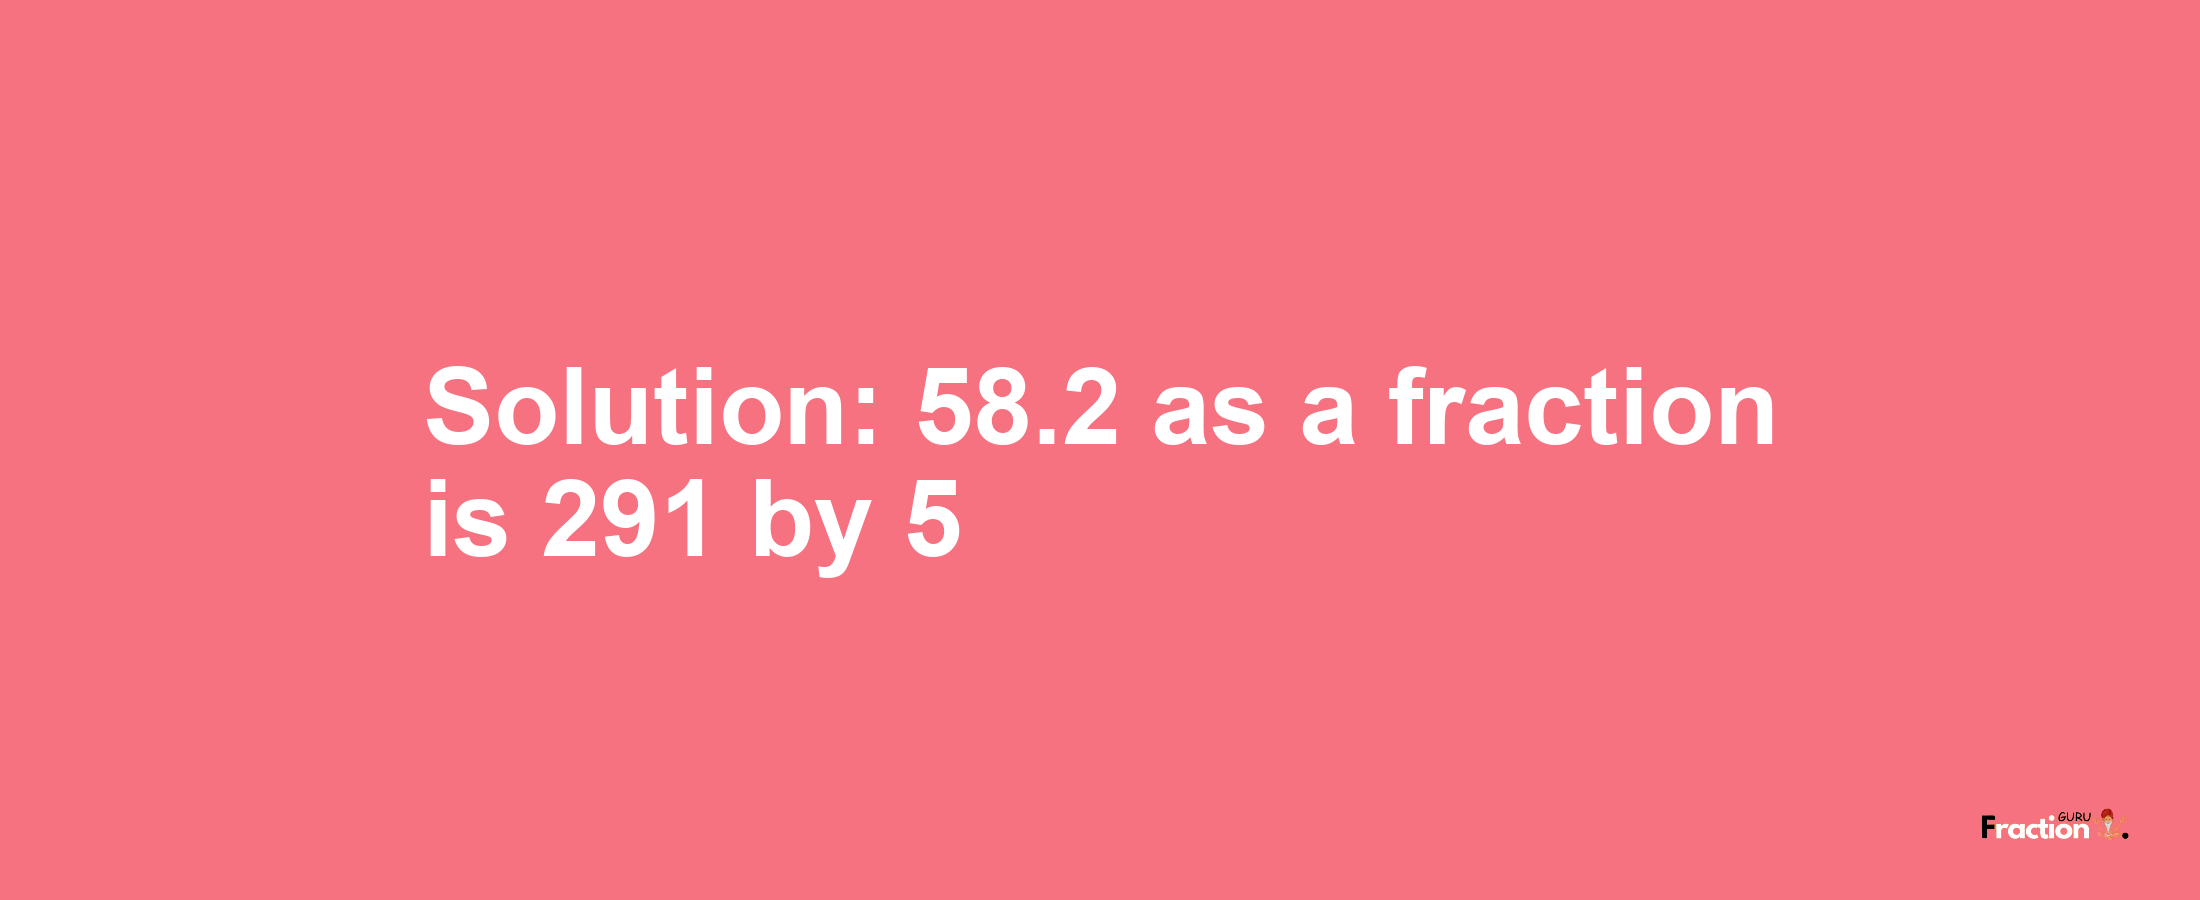 Solution:58.2 as a fraction is 291/5